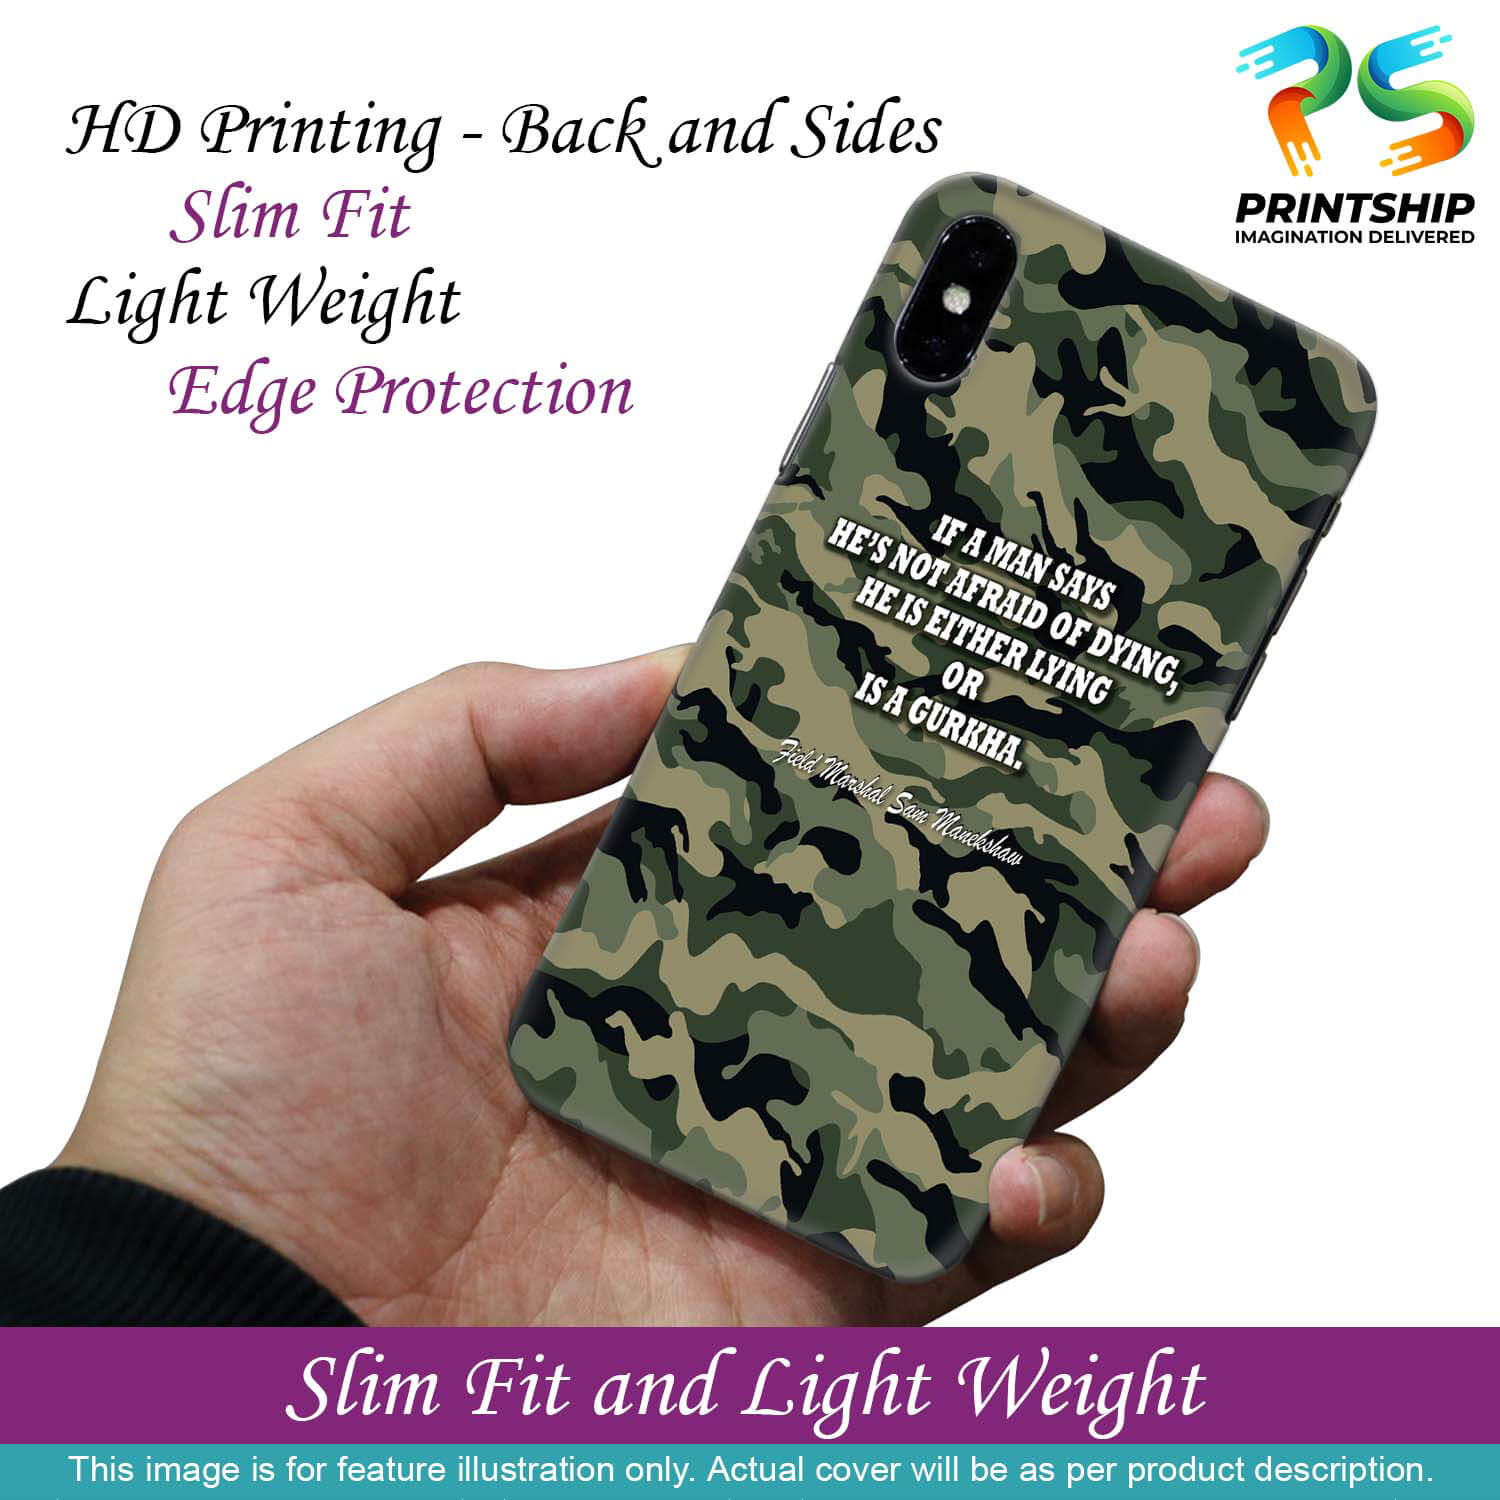 W0450-Indian Army Quote Back Cover for OnePlus 7T